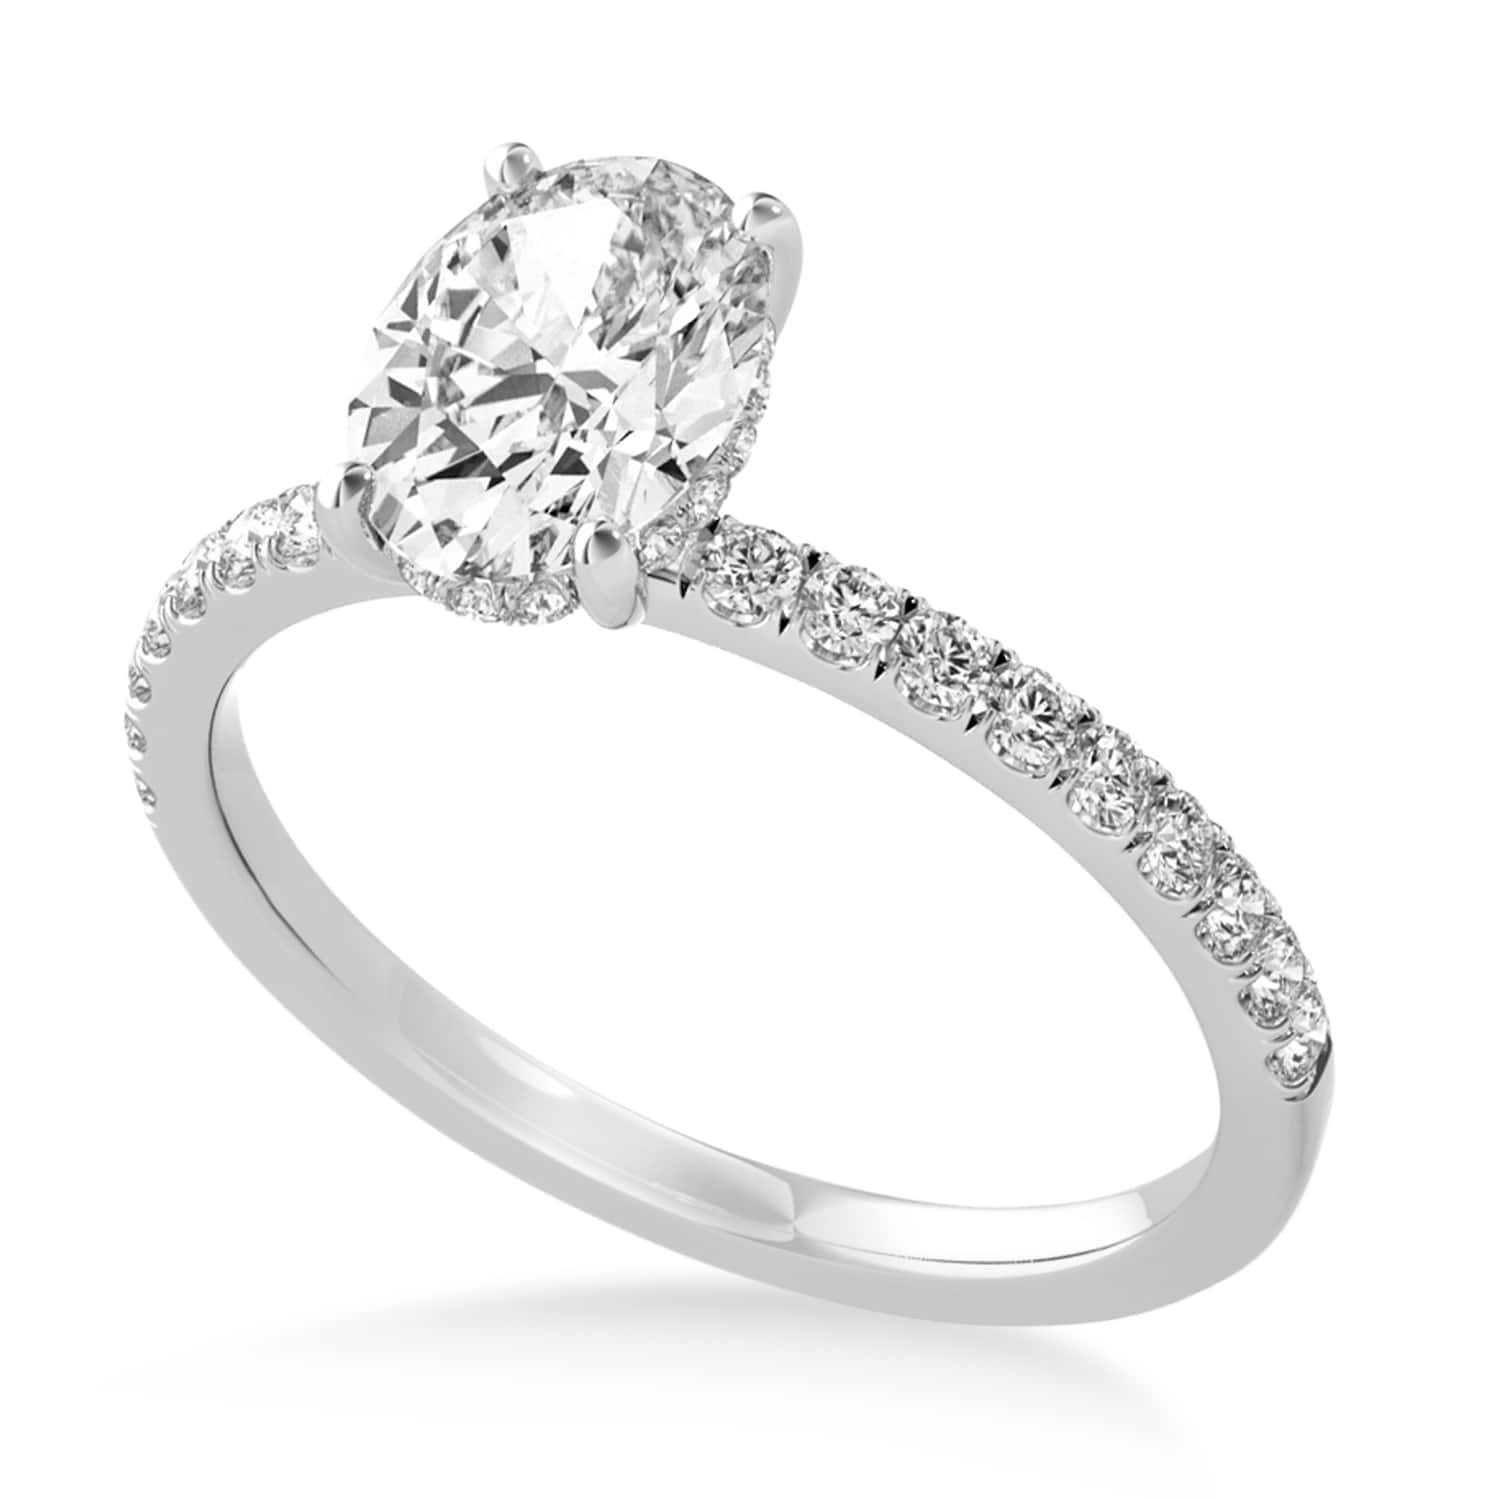 Oval Lab Grown Diamond Single Row Hidden Halo Engagement Ring 14k White Gold (3.00ct)